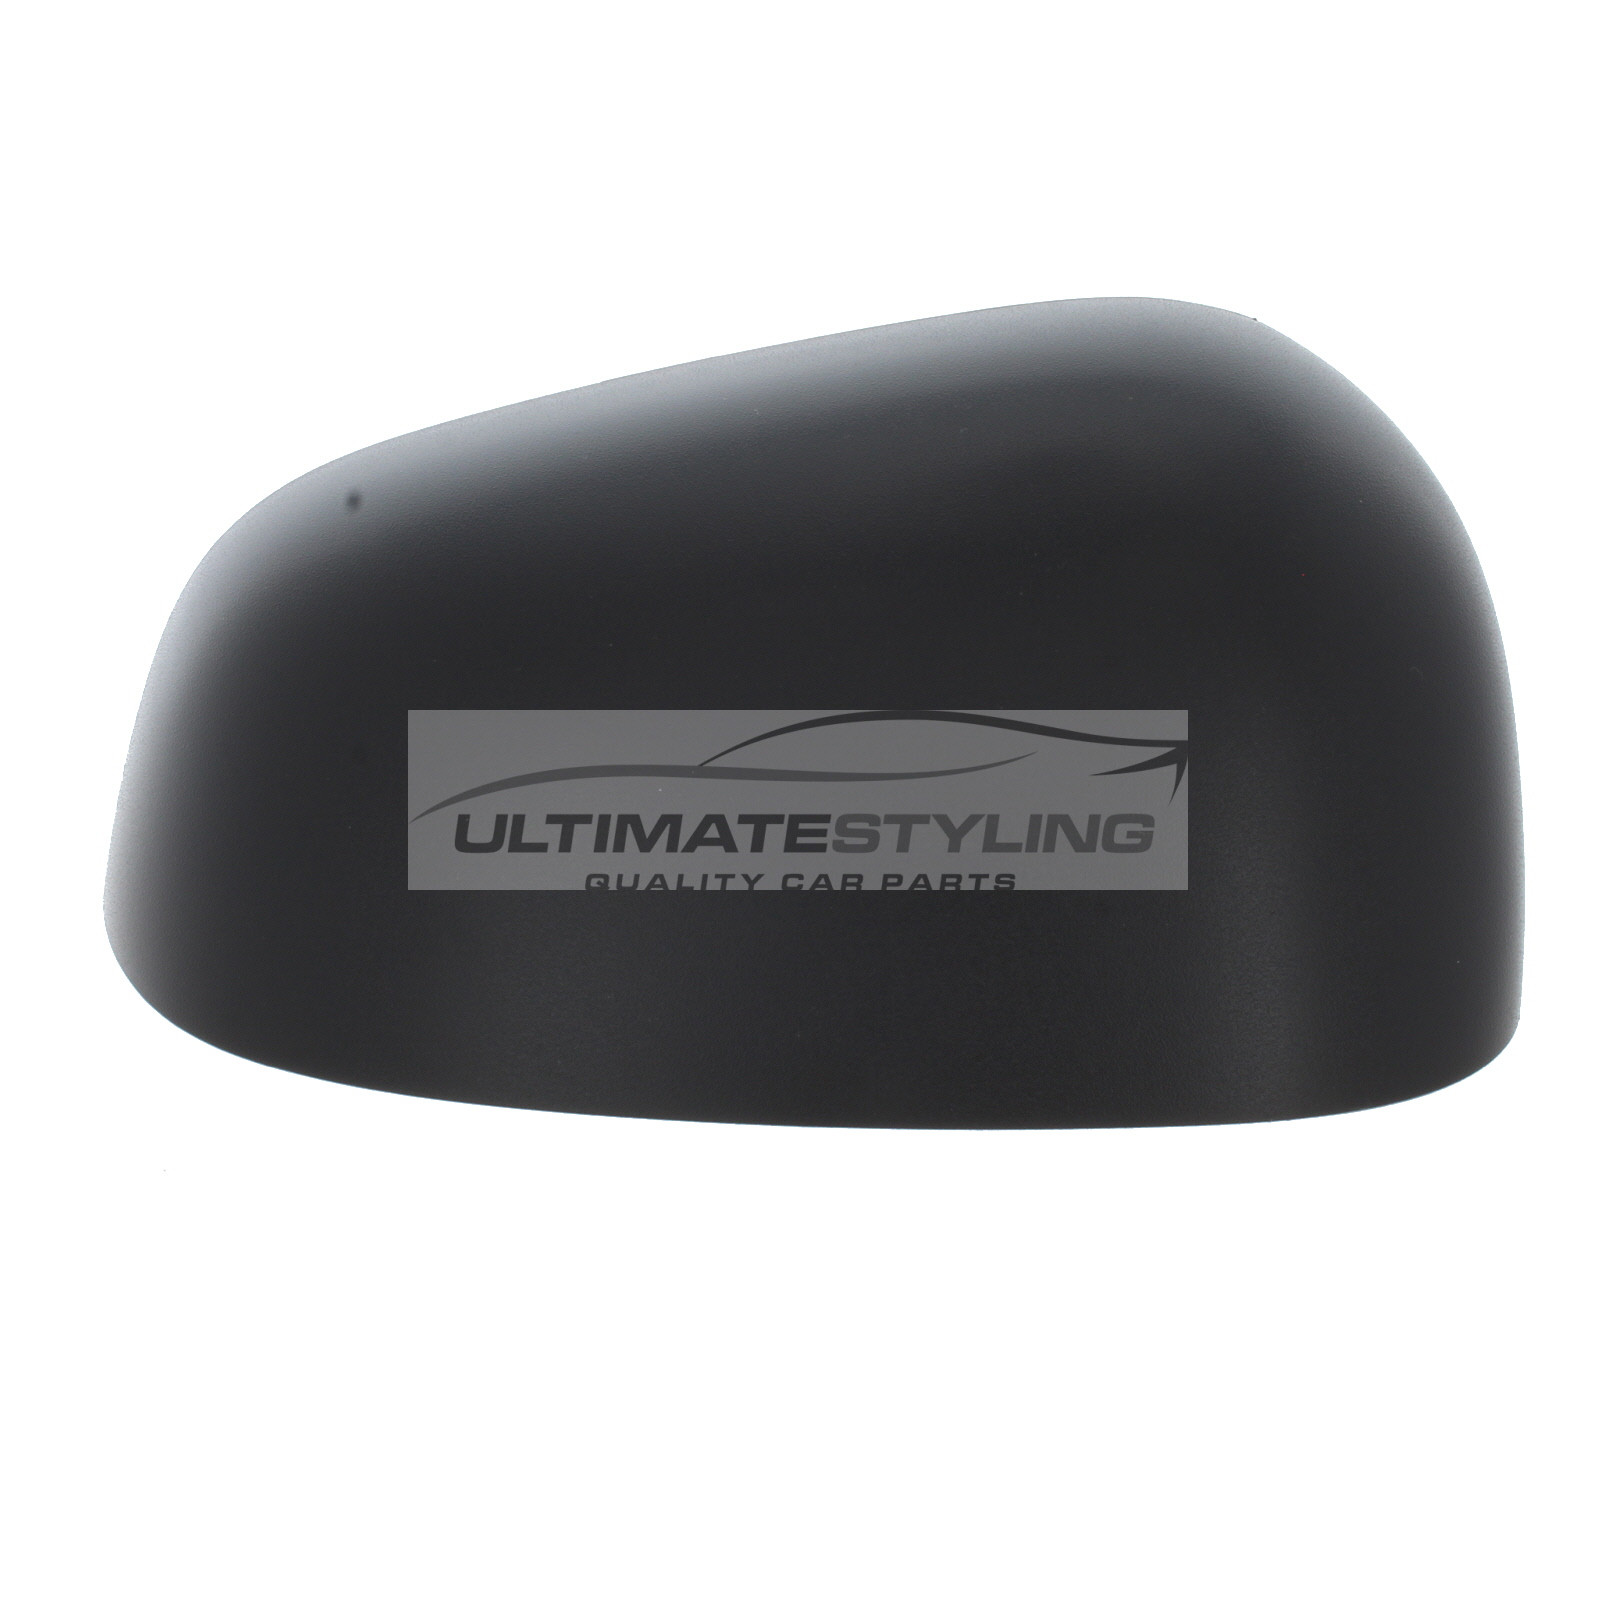 Chevrolet Spark 2009-2015 Wing Mirror Cover Cap Casing Black (Textured) Drivers Side (RH)